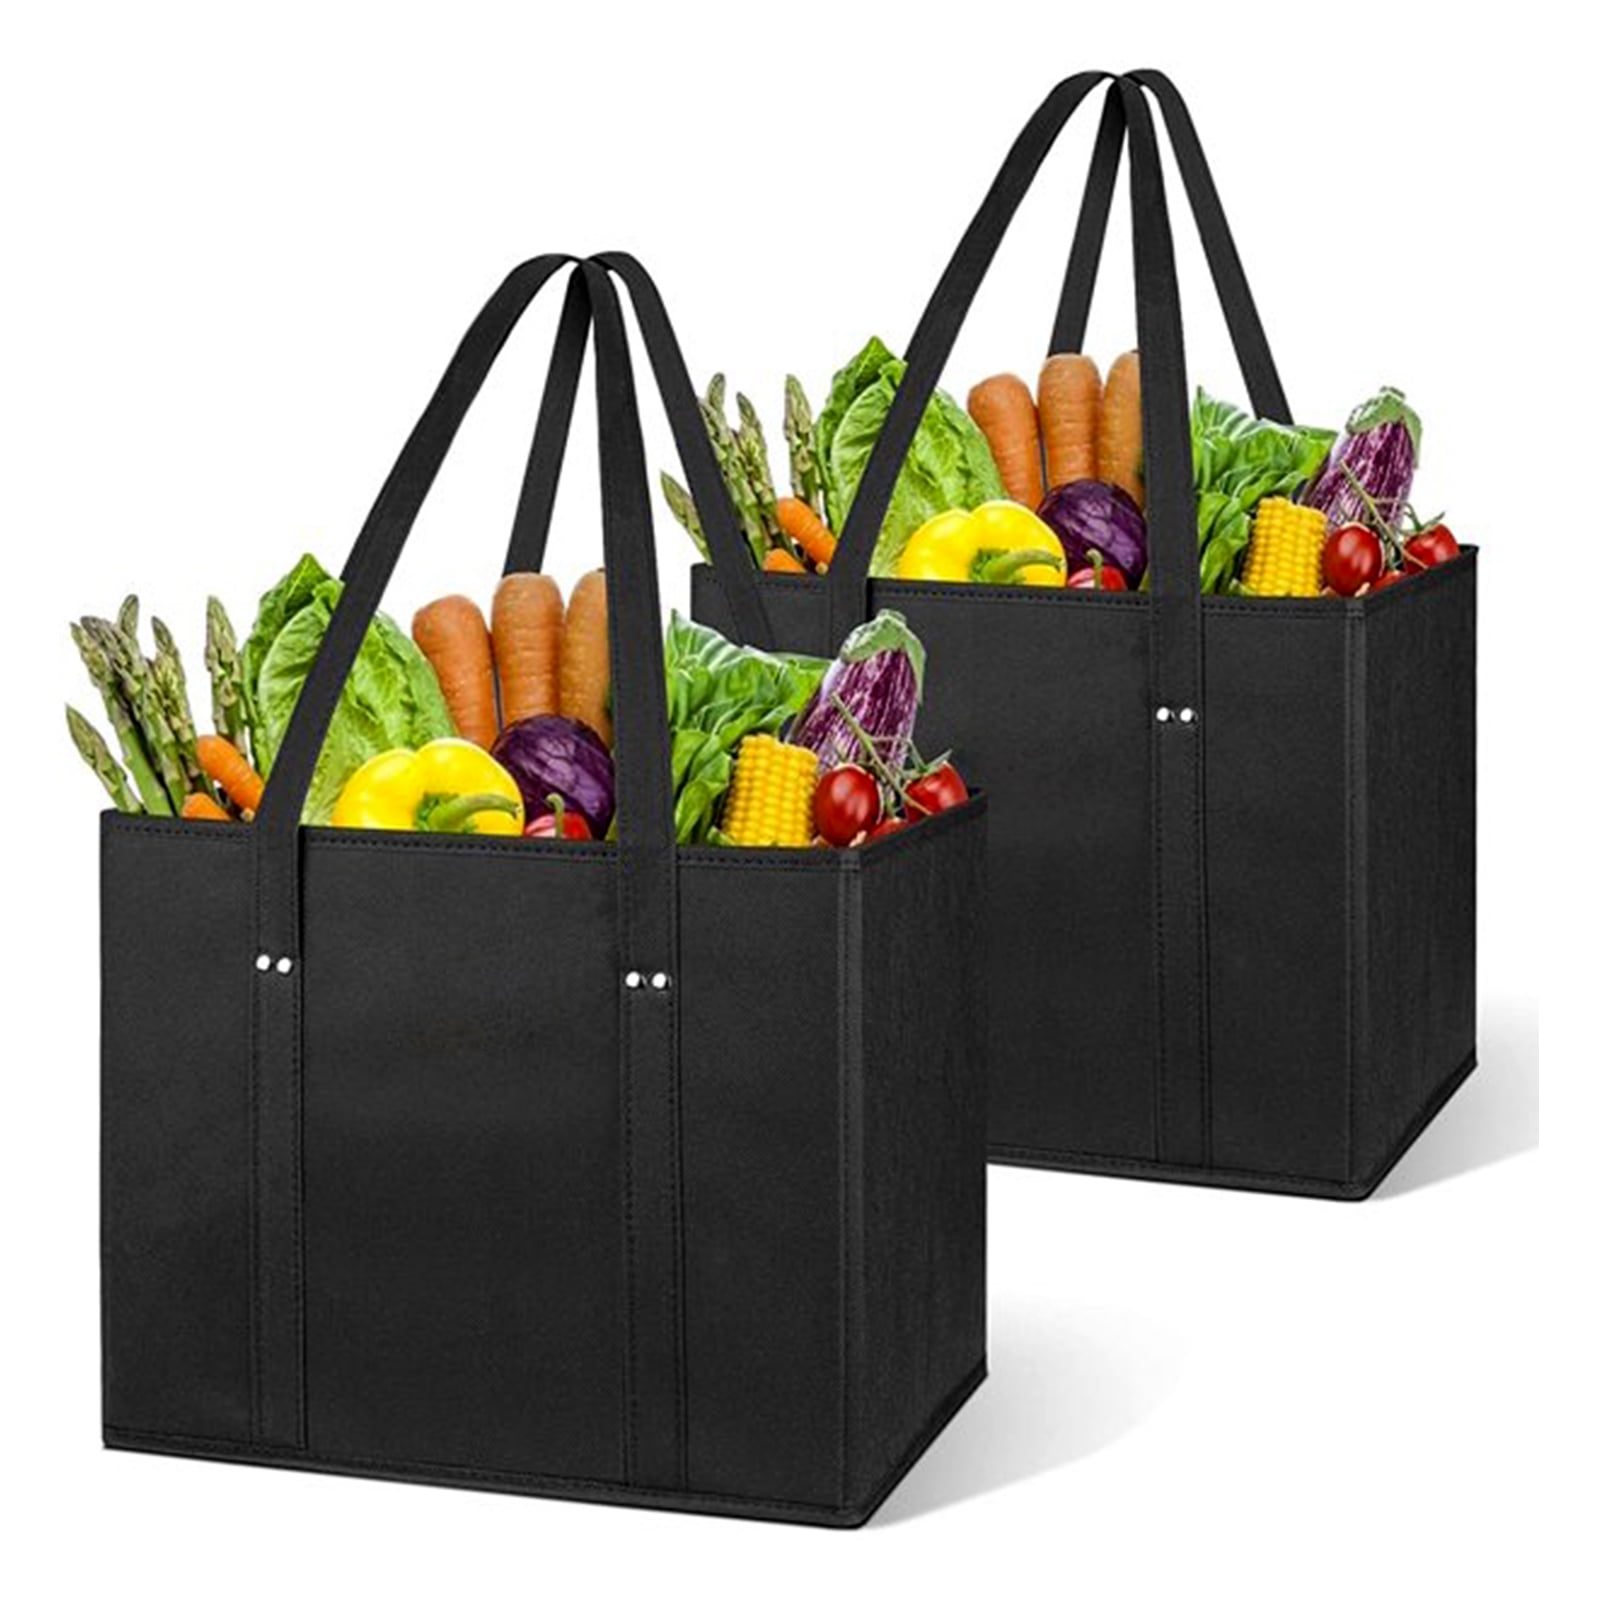 2Pcs Grocery Shopping Bags Foldable Grocery Bags Heavy Duty Shopping Tote 